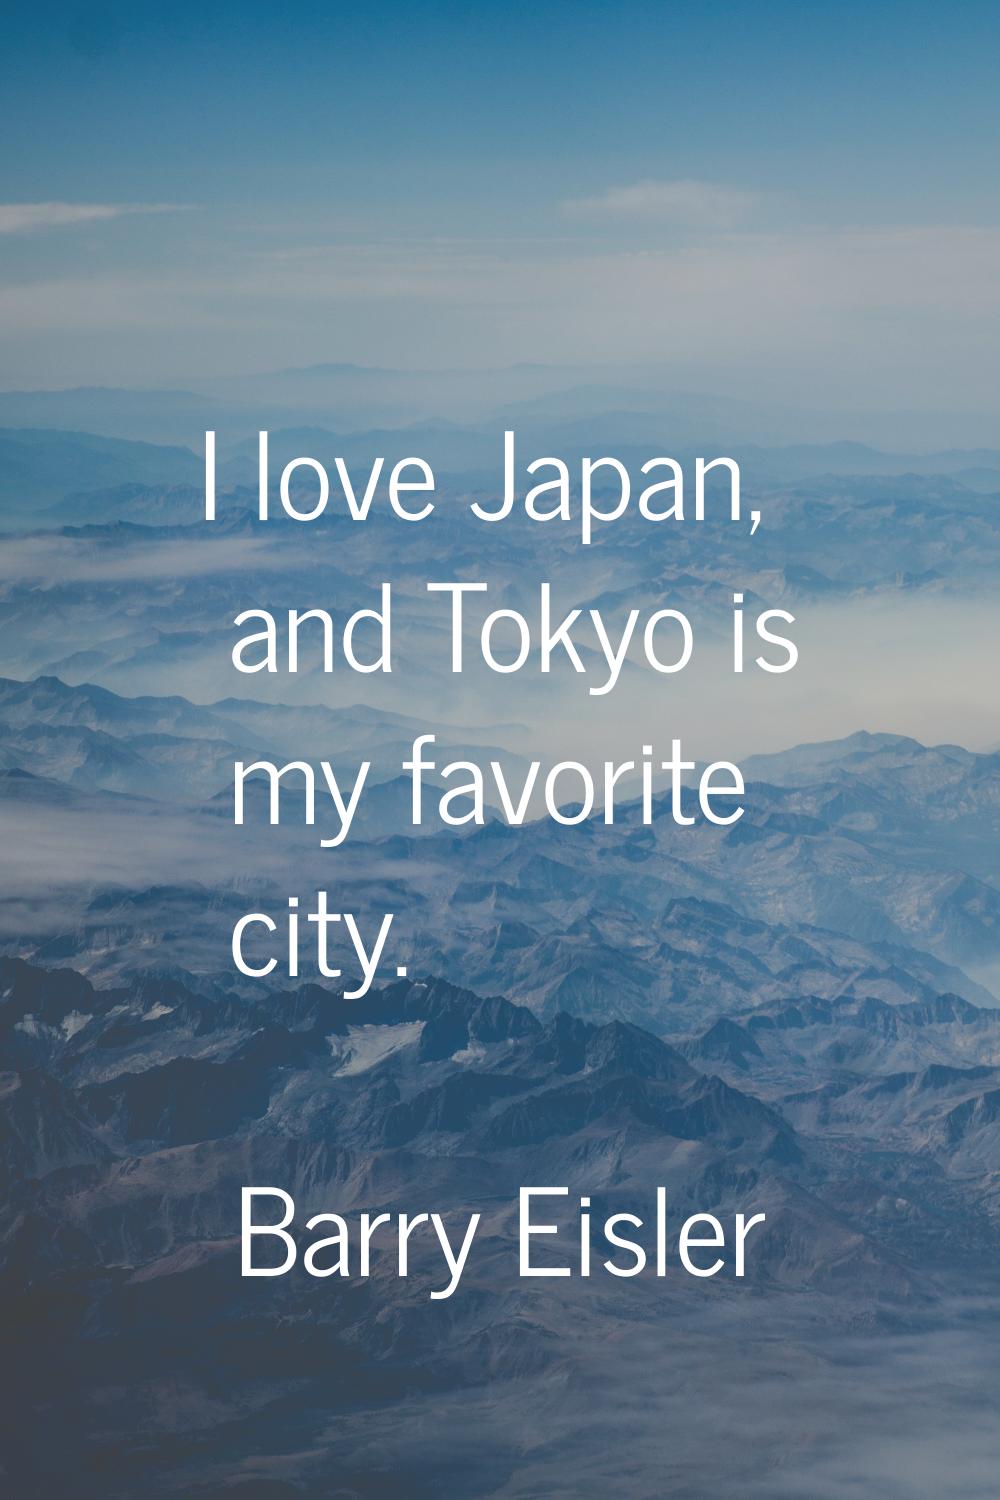 I love Japan, and Tokyo is my favorite city.